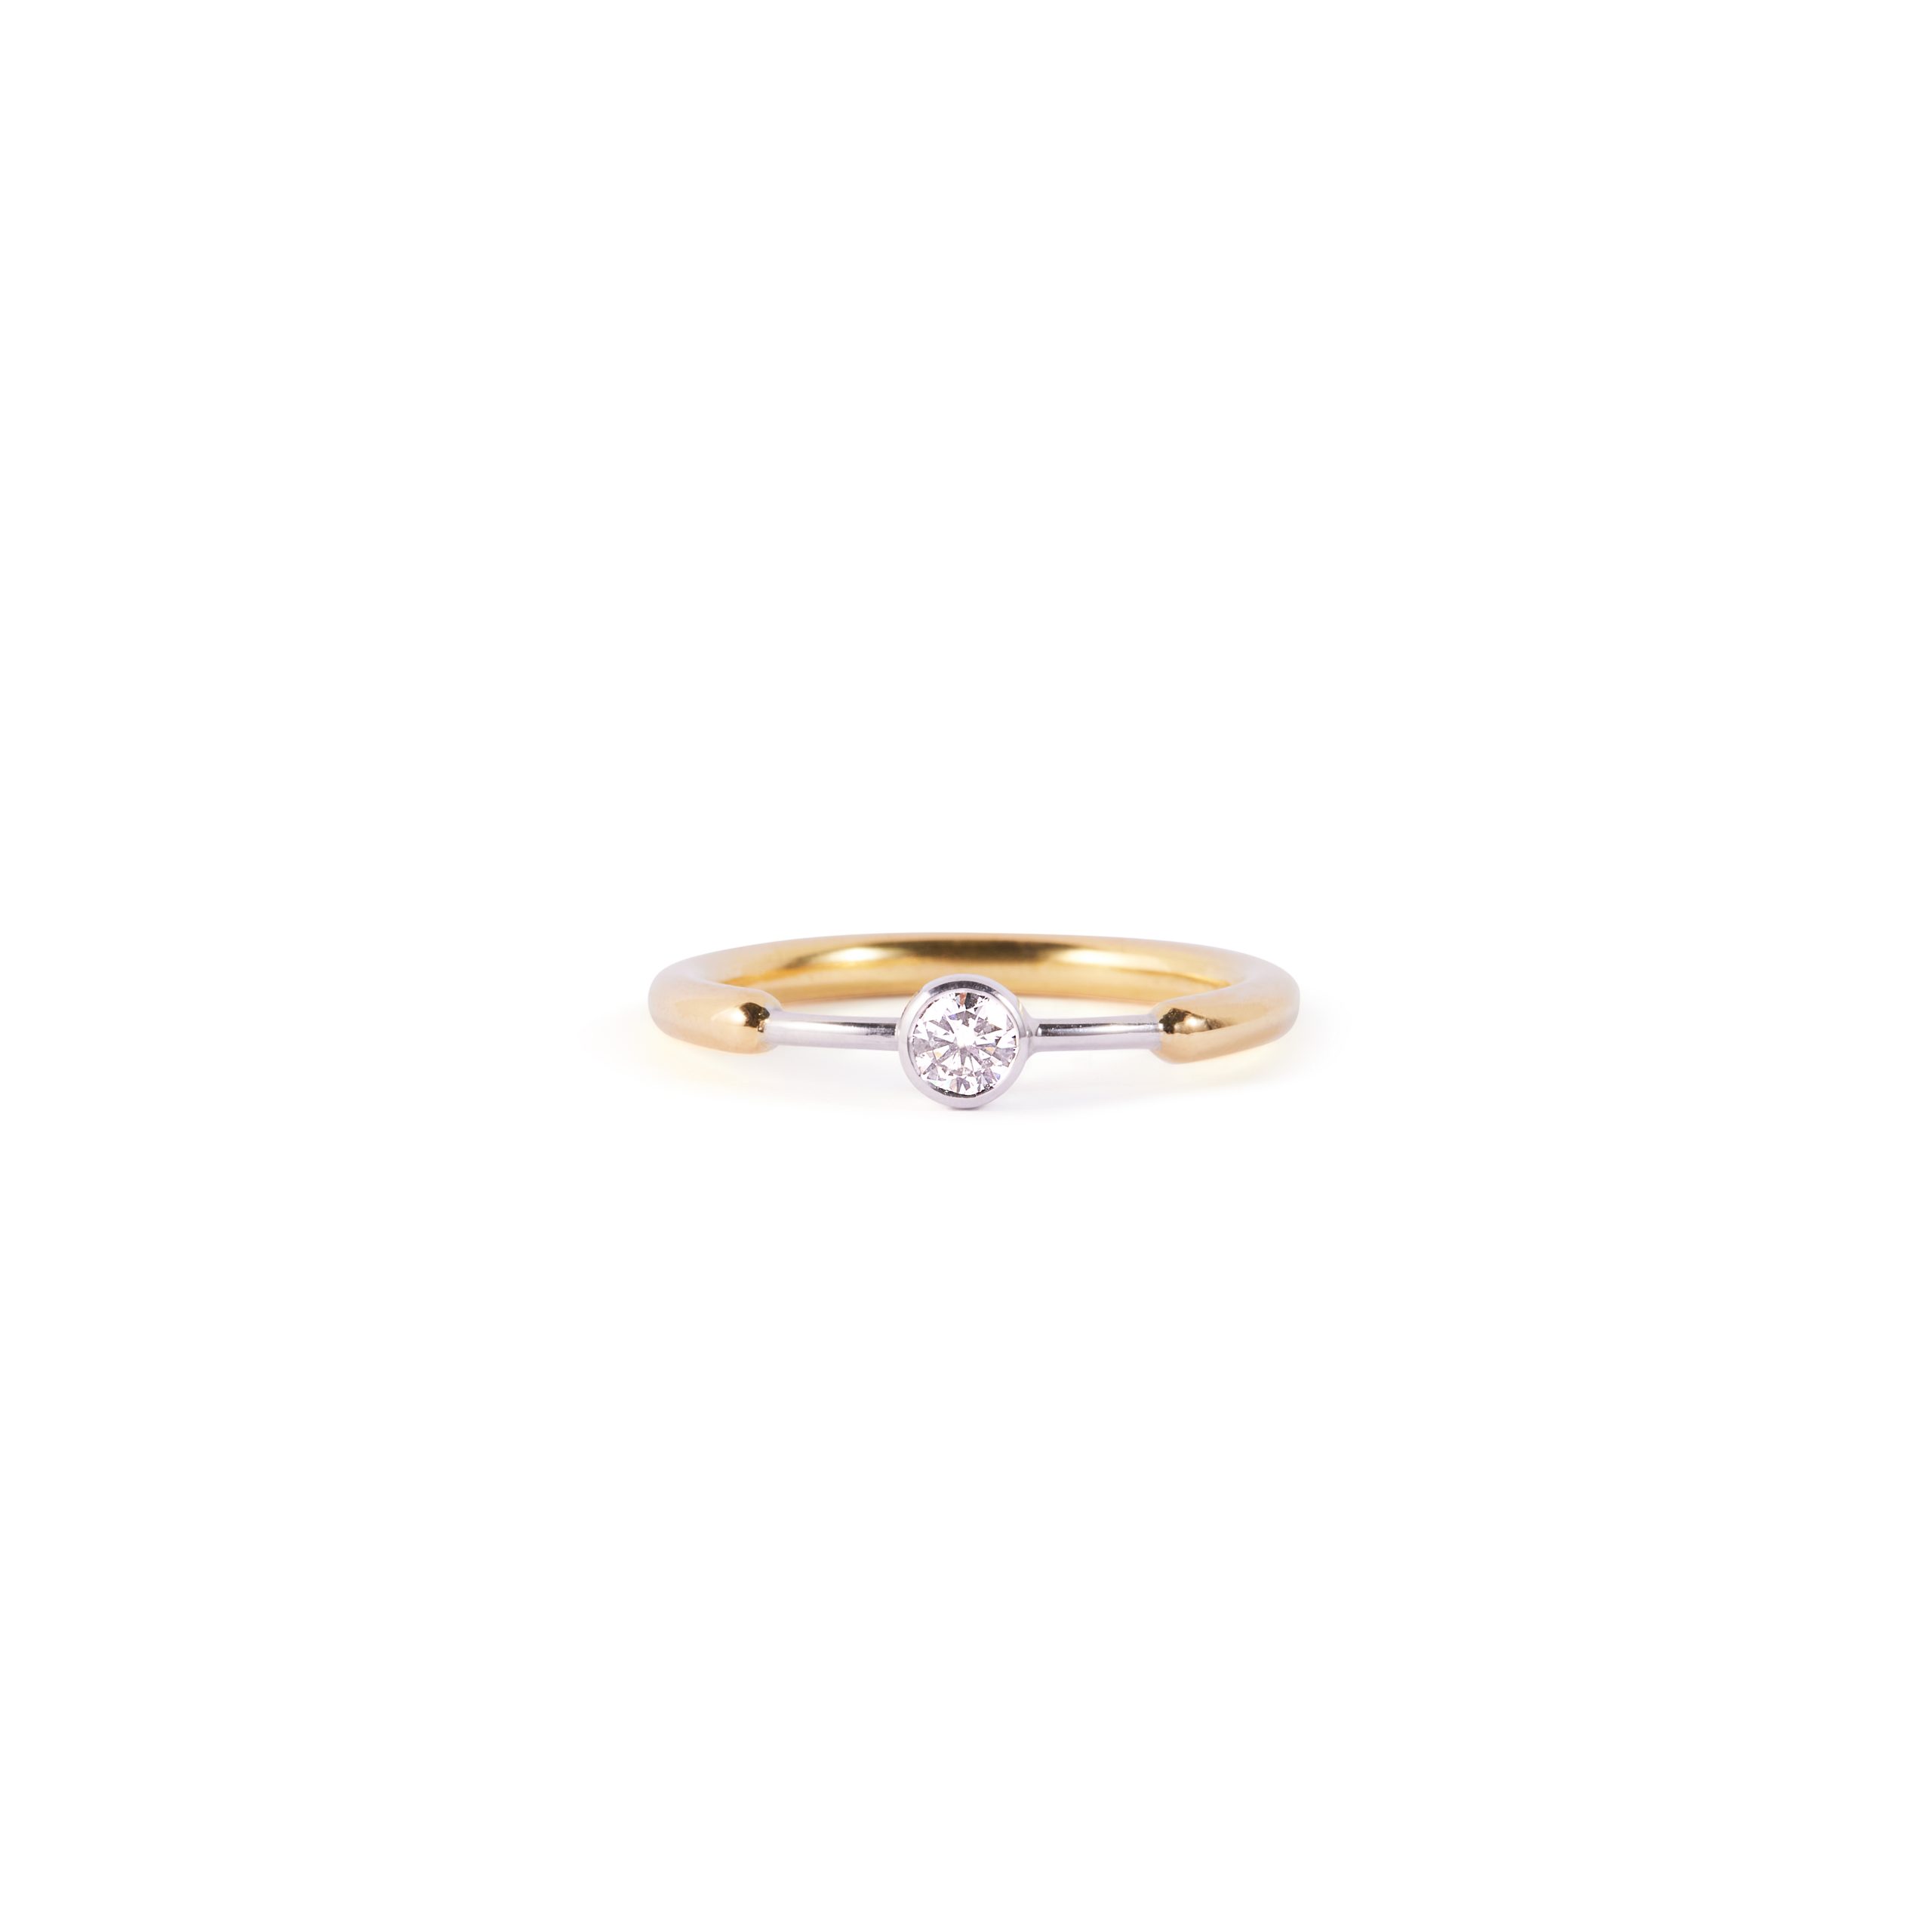 18ct Yellow and White Gold Diamond Dress Ring. - Lind Jewellery Design